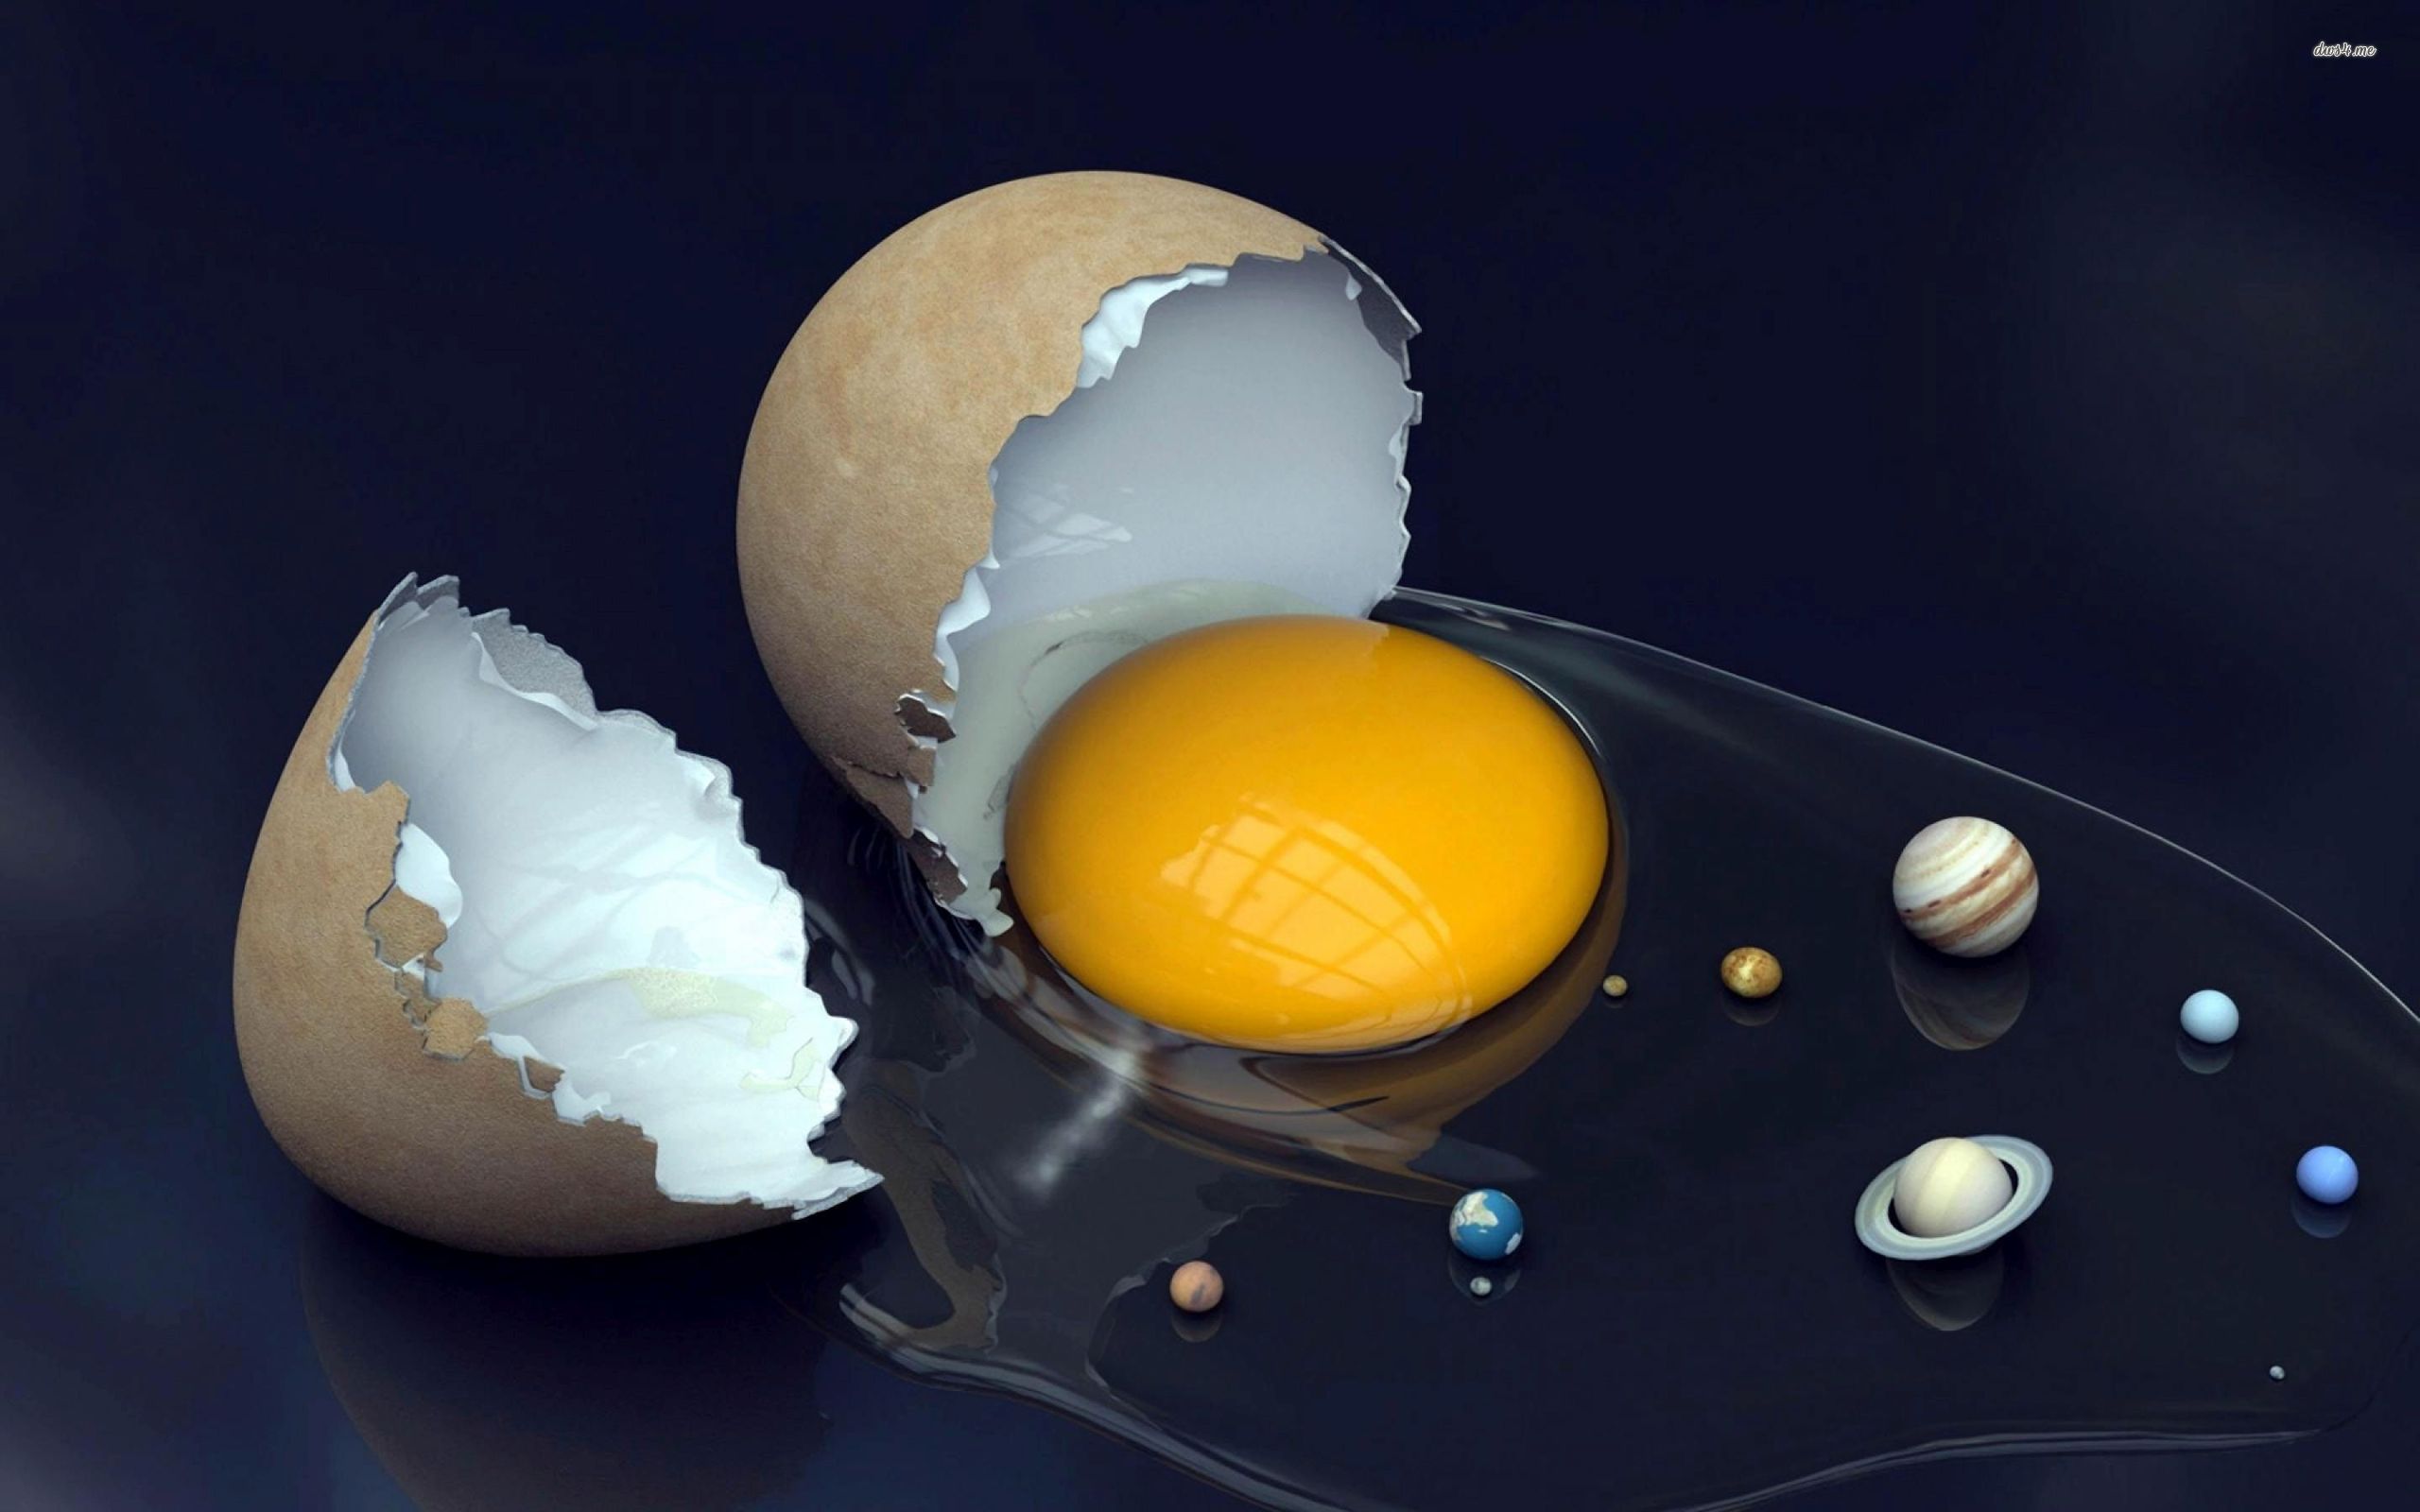 Egg Solar System wallpaper - Space wallpapers - #29498